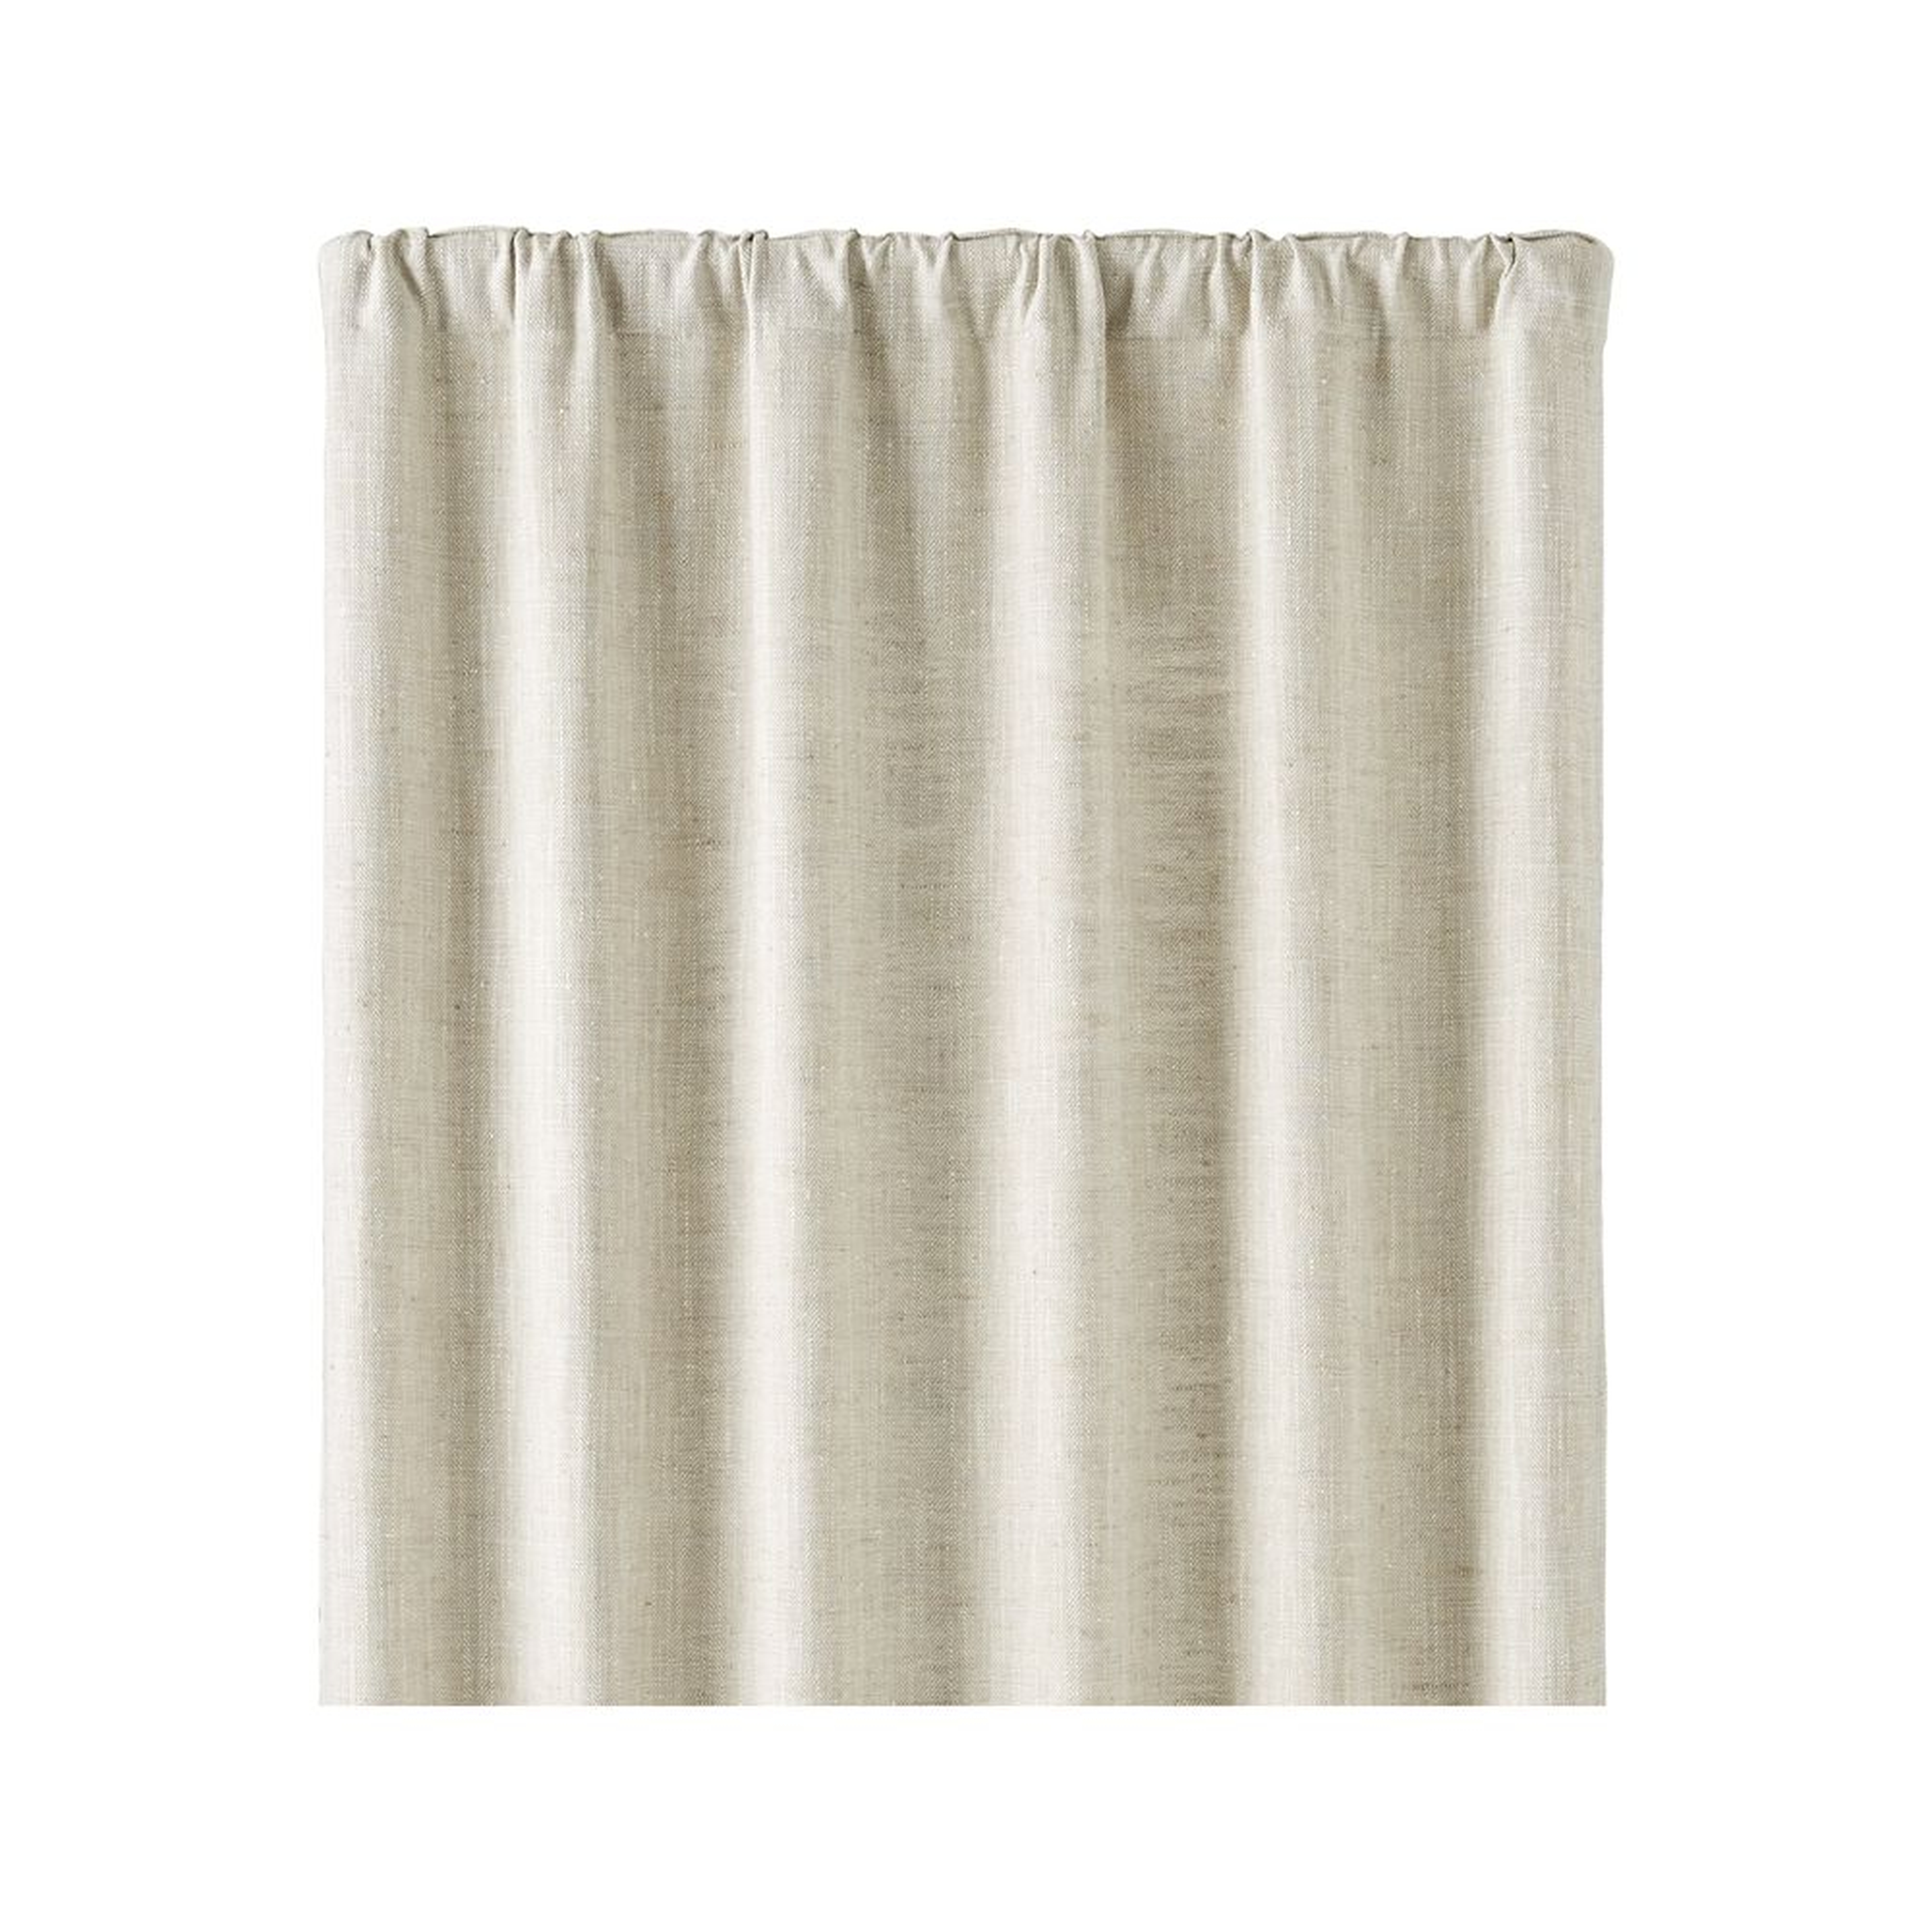 Reid Natural 48"x84" Curtain Panel - Crate and Barrel